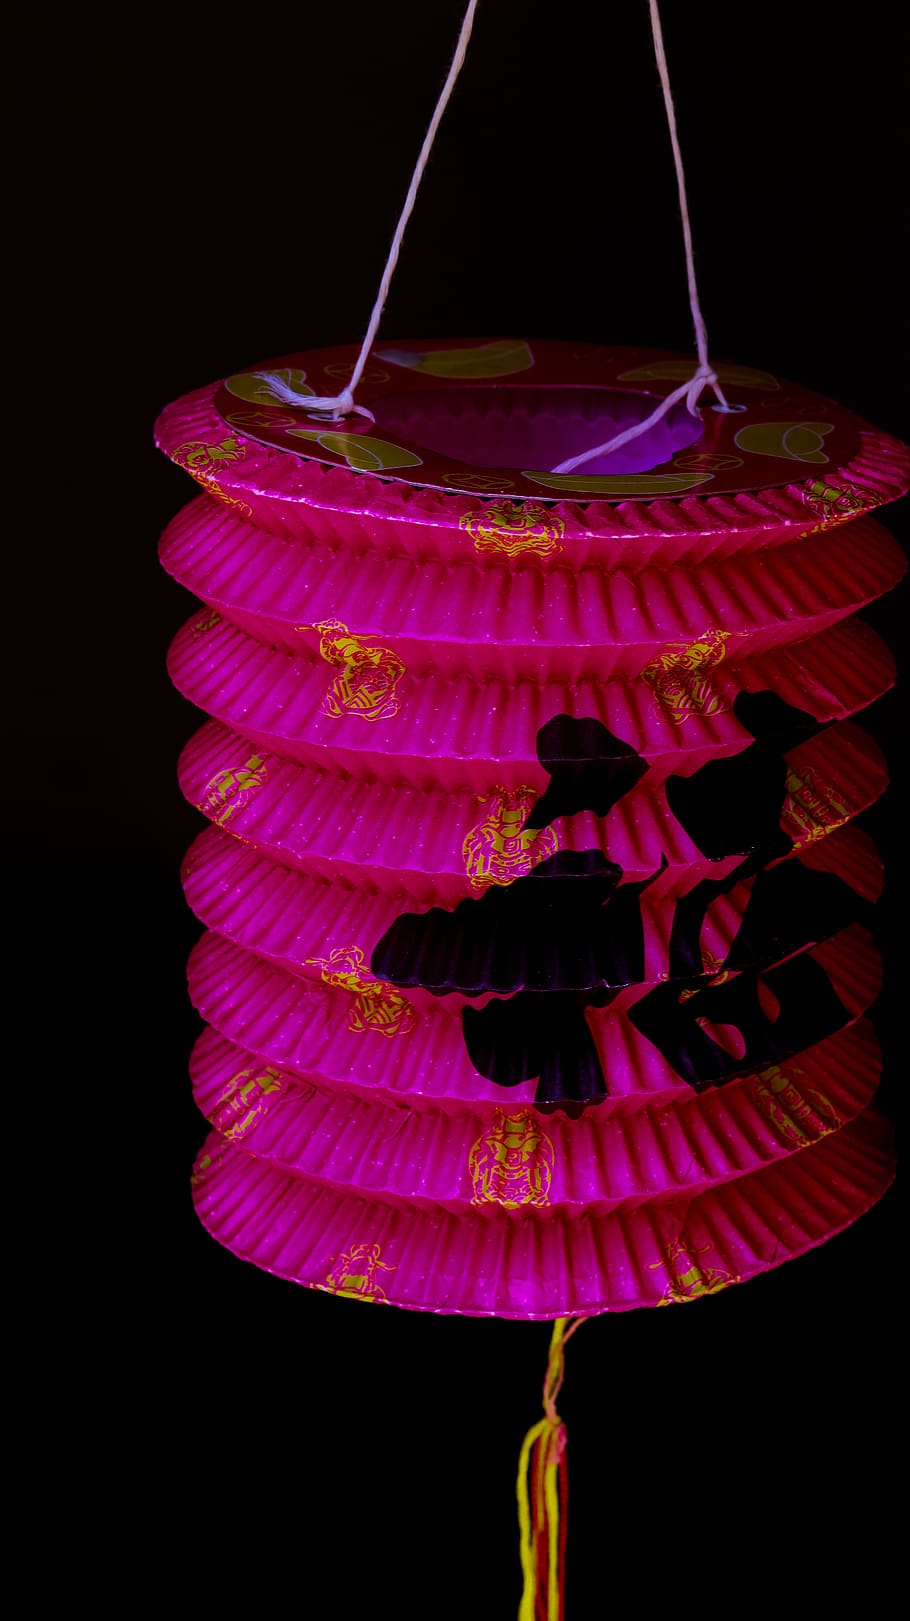 coil, spiral, lamp, Chinese New year, lunar New year, lantern, paper lantern, light, red, Chinese, HD wallpaper